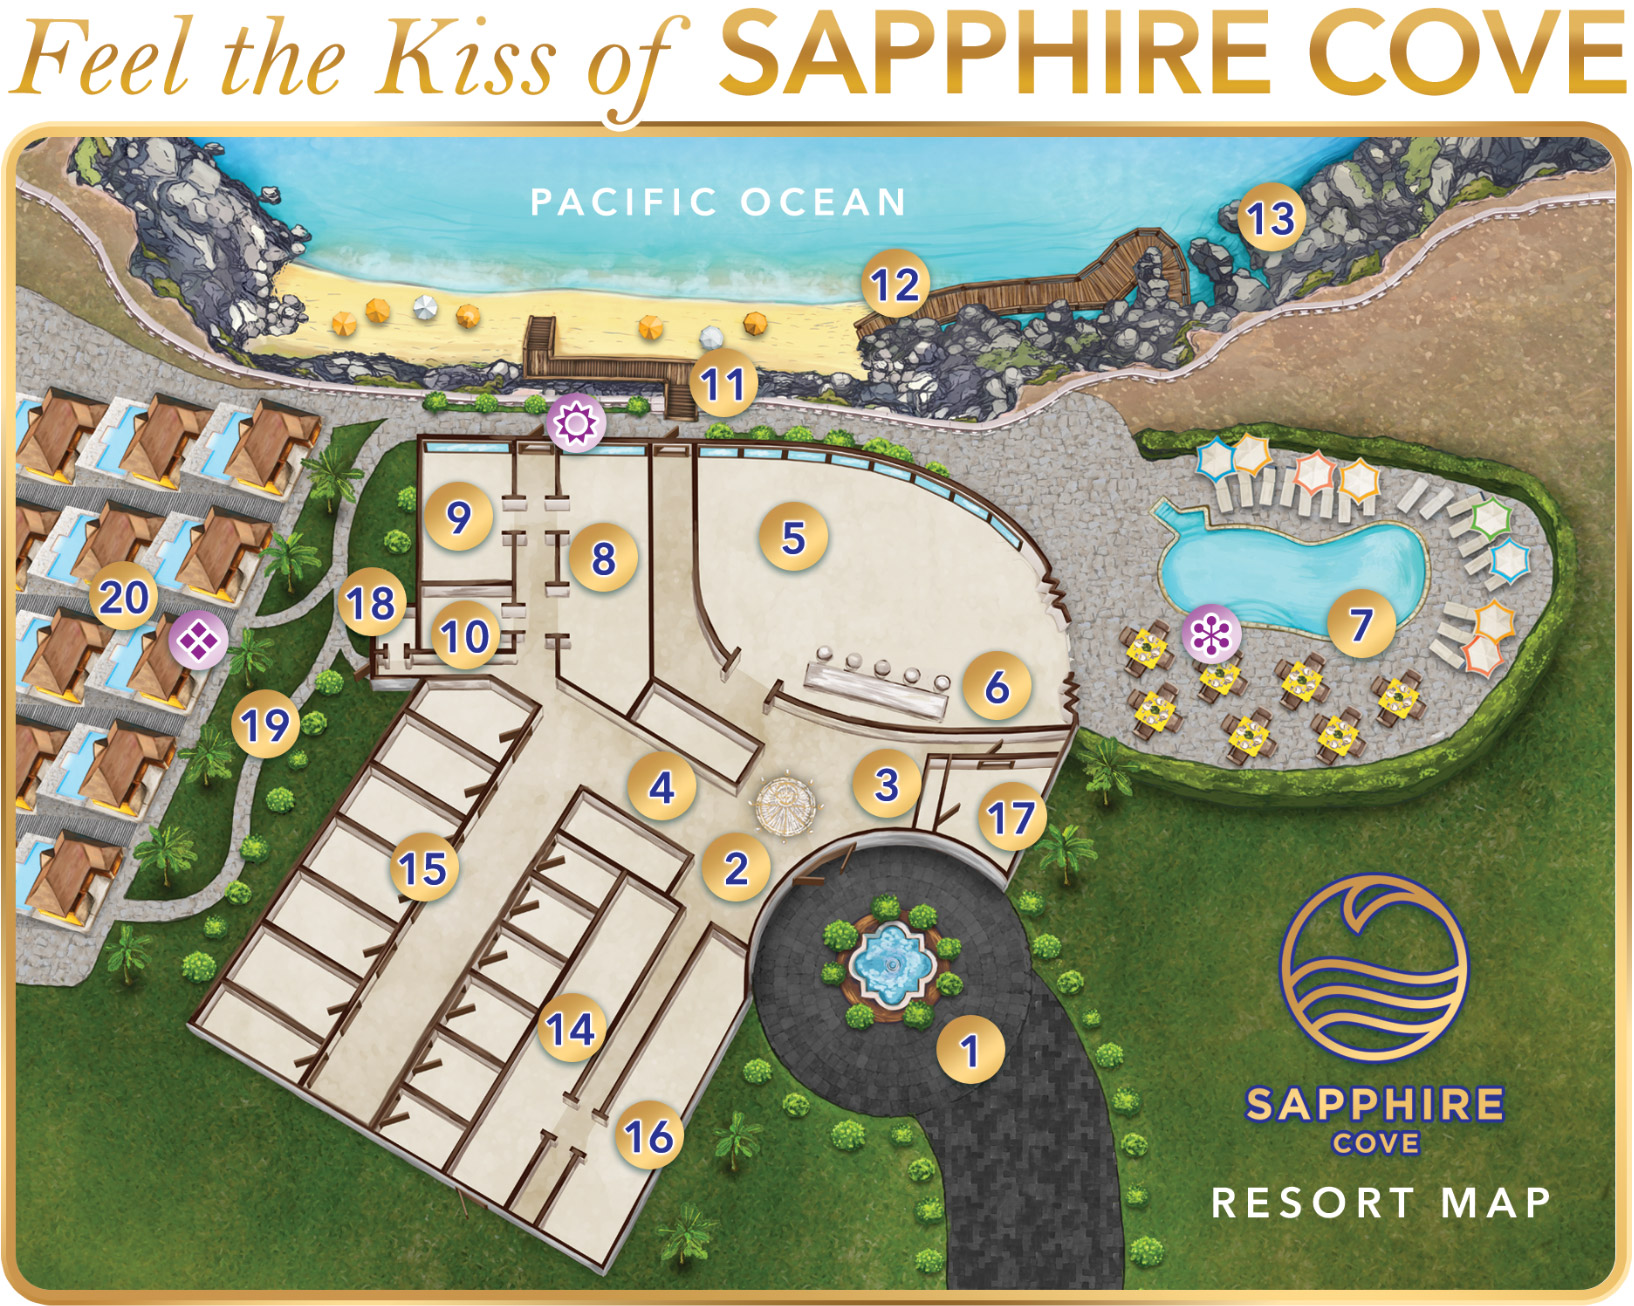 Resort Map of Sapphire Cove titled "Feel the Kiss of Sapphire Cove" with numbered locations on the map.